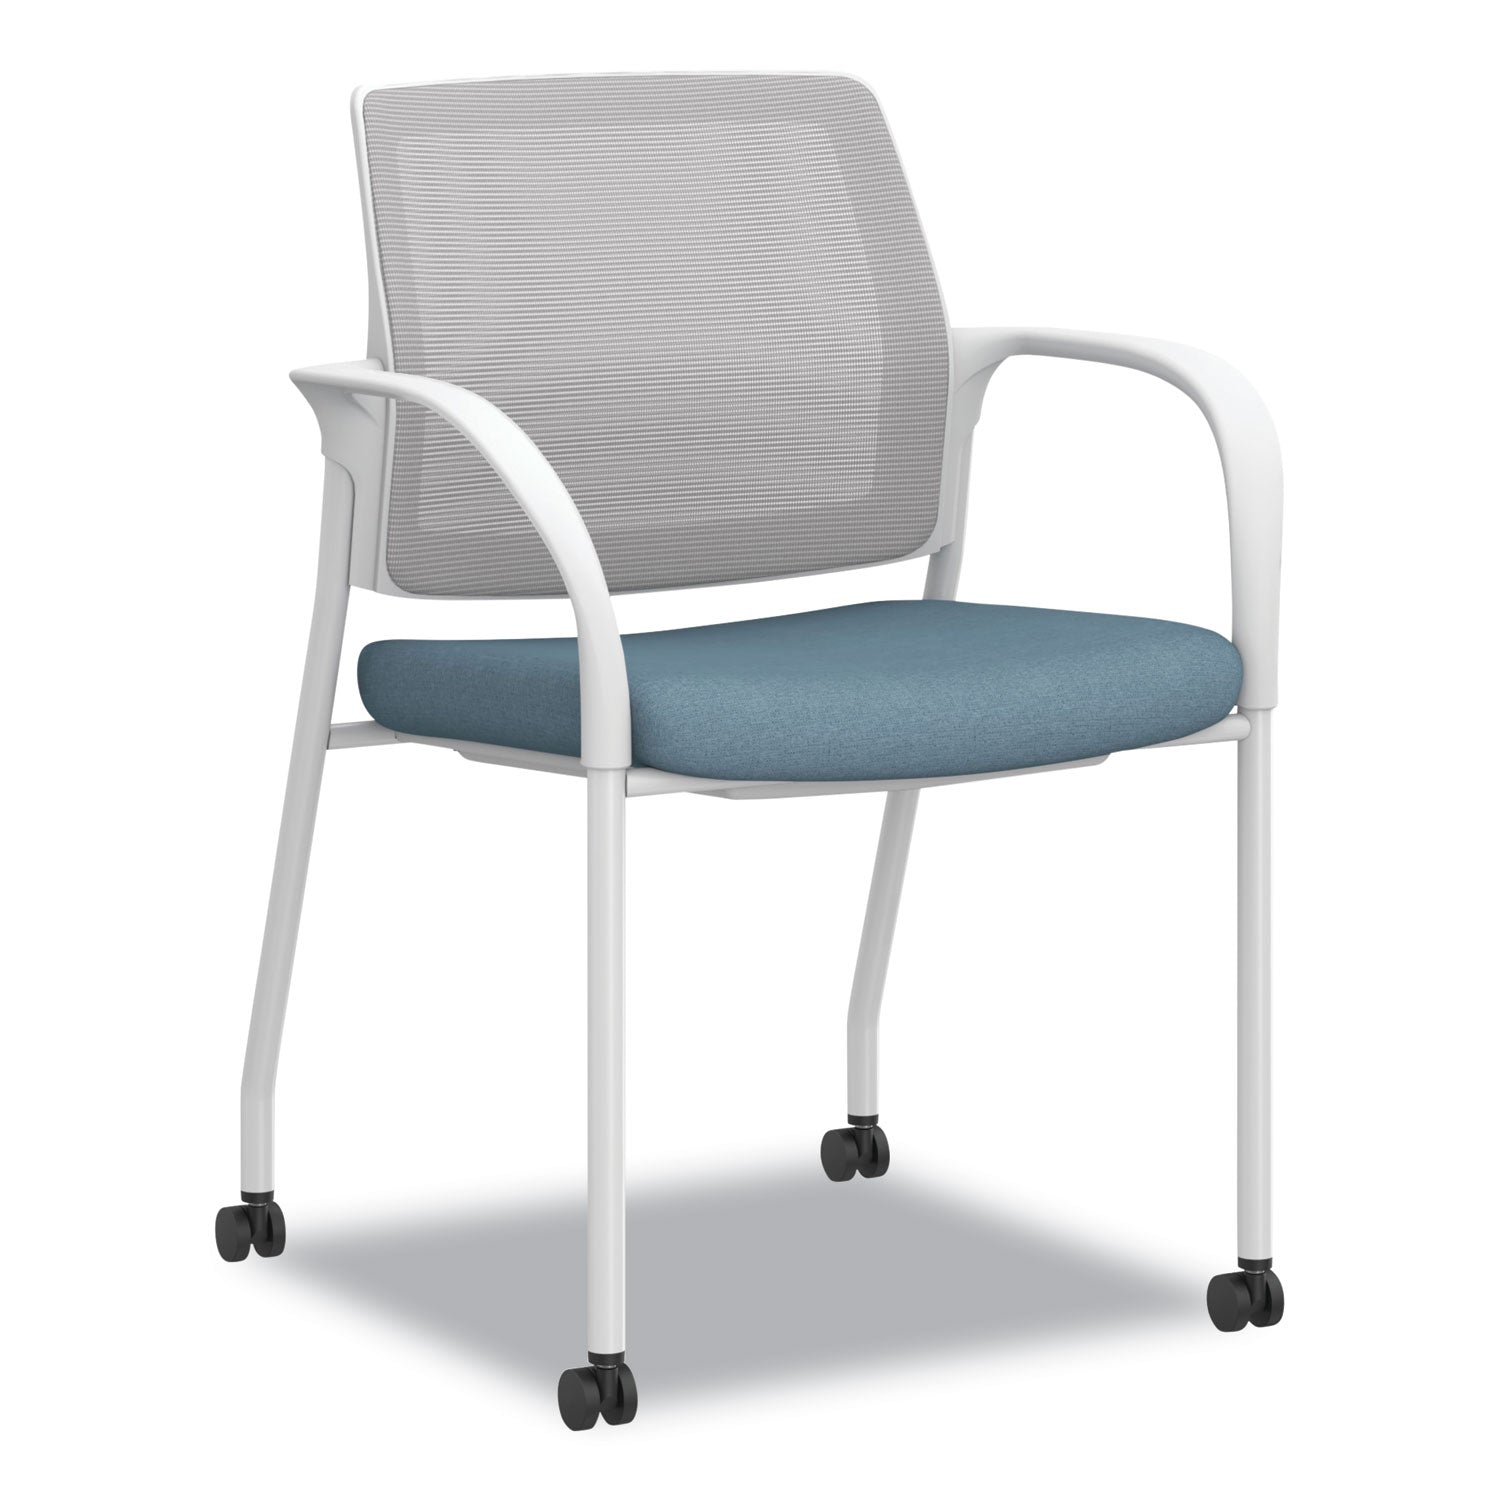 ignition-series-mesh-back-mobile-stacking-chair-fabric-seat-25-x-2175-x-335-carolina-fog-white-ships-in-7-10-bus-days_honi2s6fhfl21k7 - 1